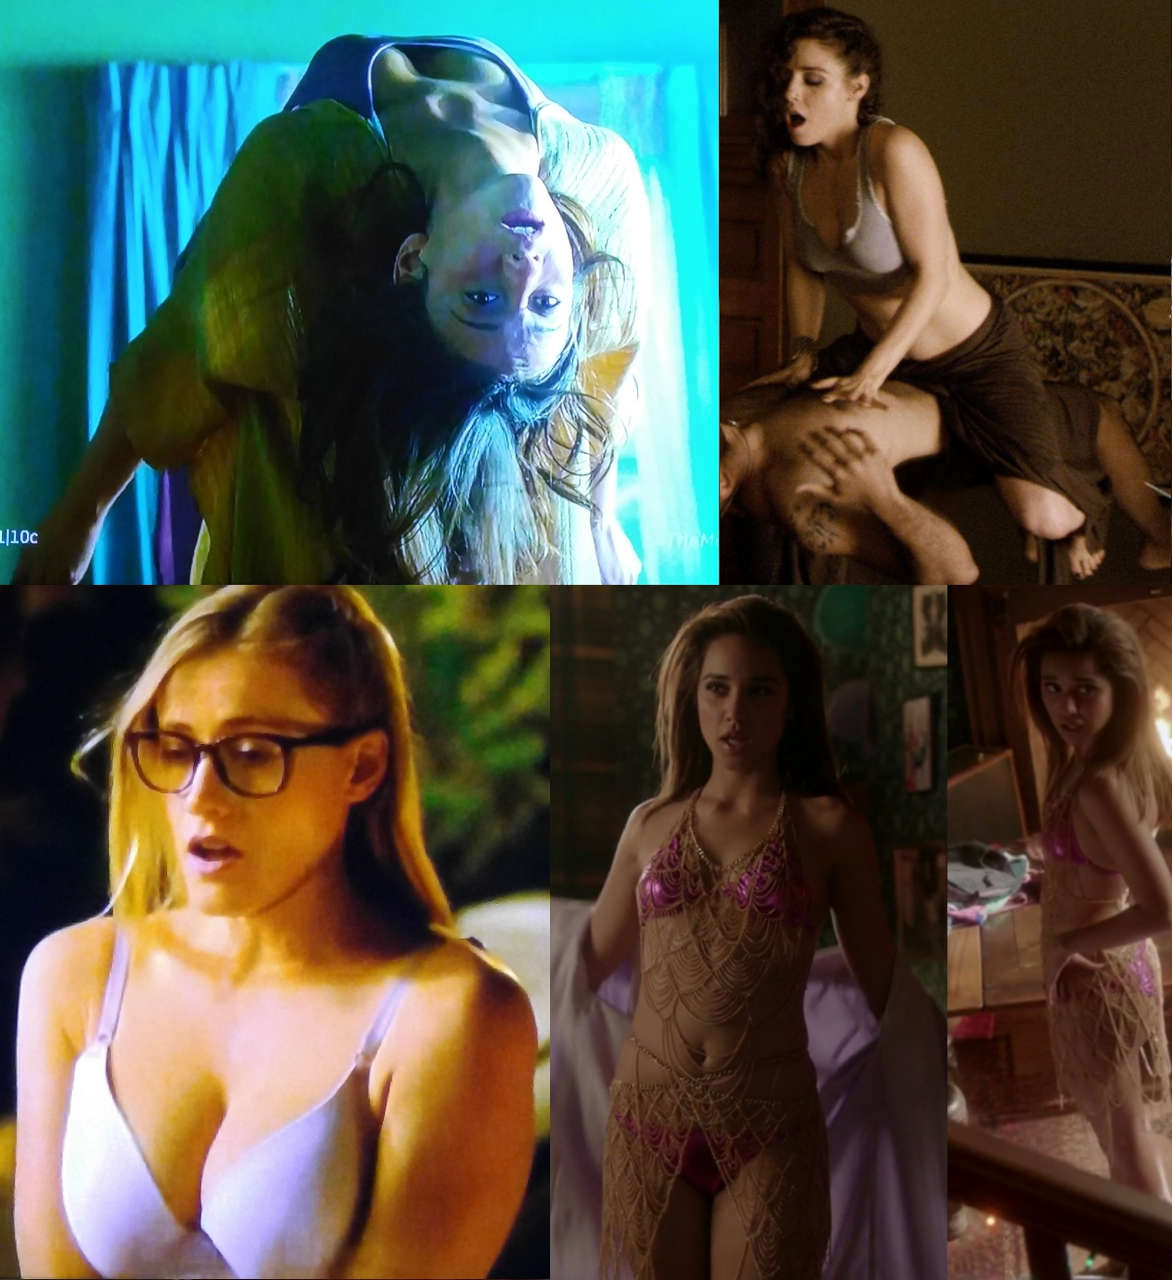 The magicians nudity